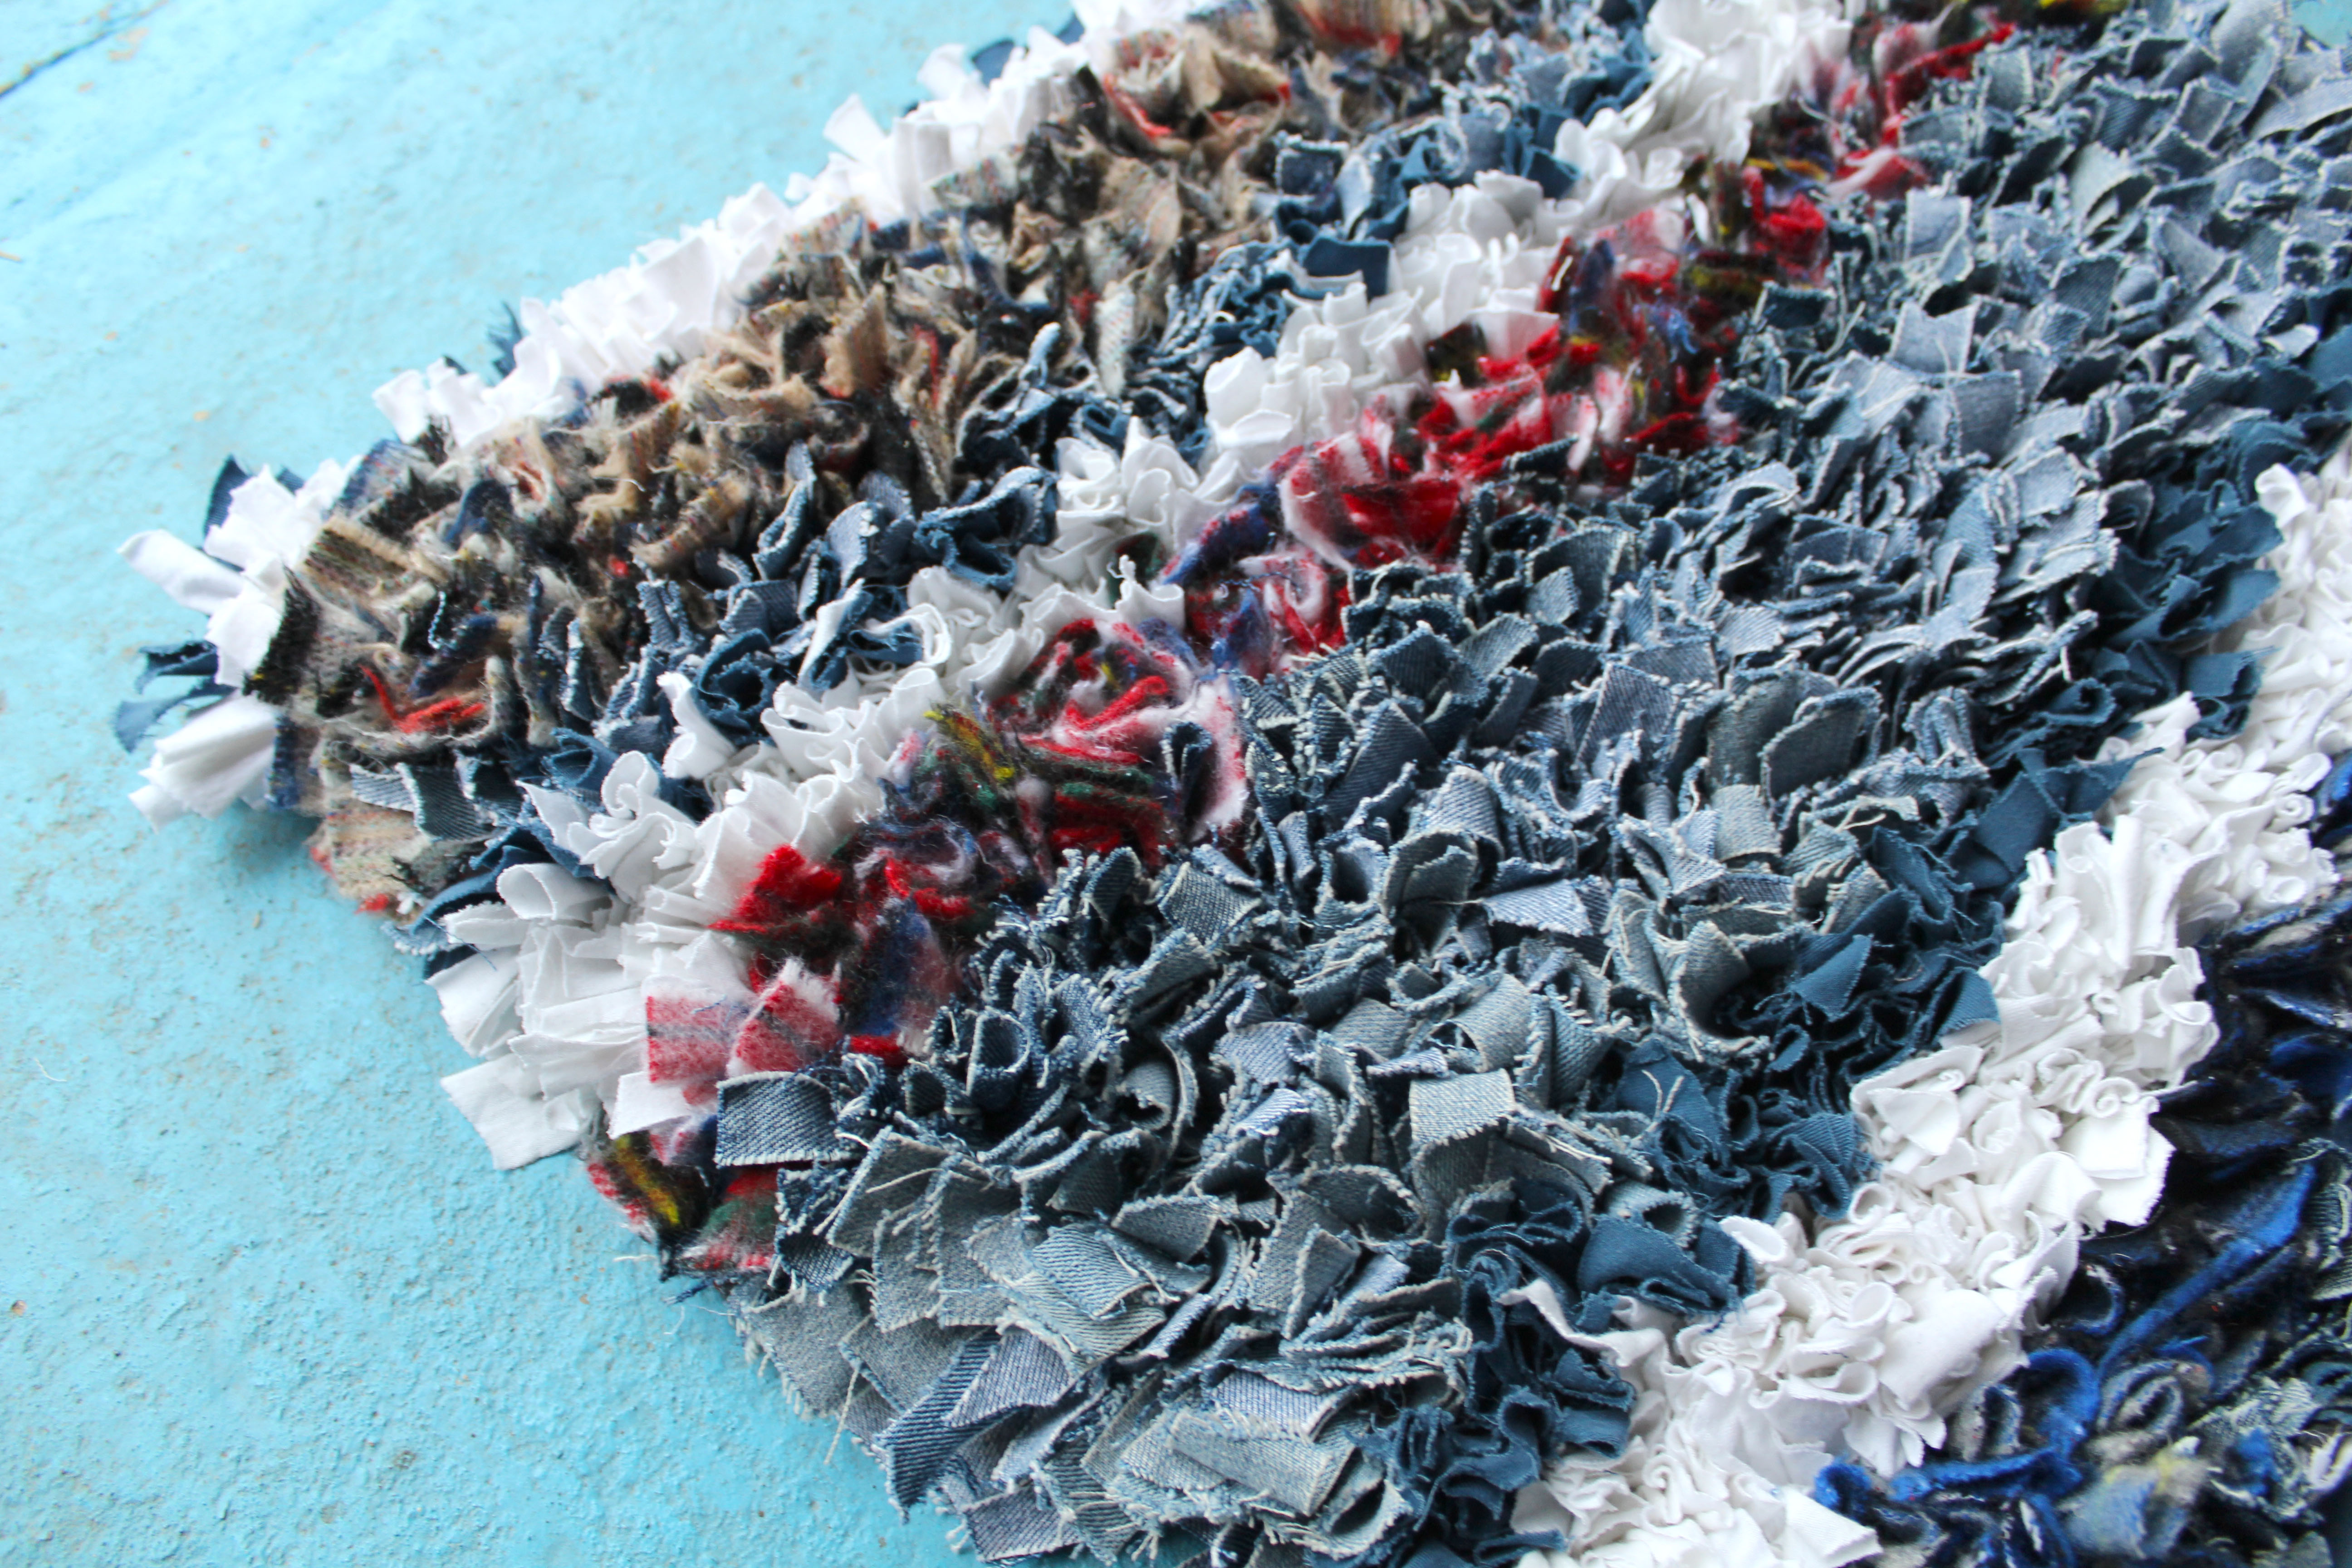 Denim, tartan and white shaggy rag rug in stripes made of old jeans